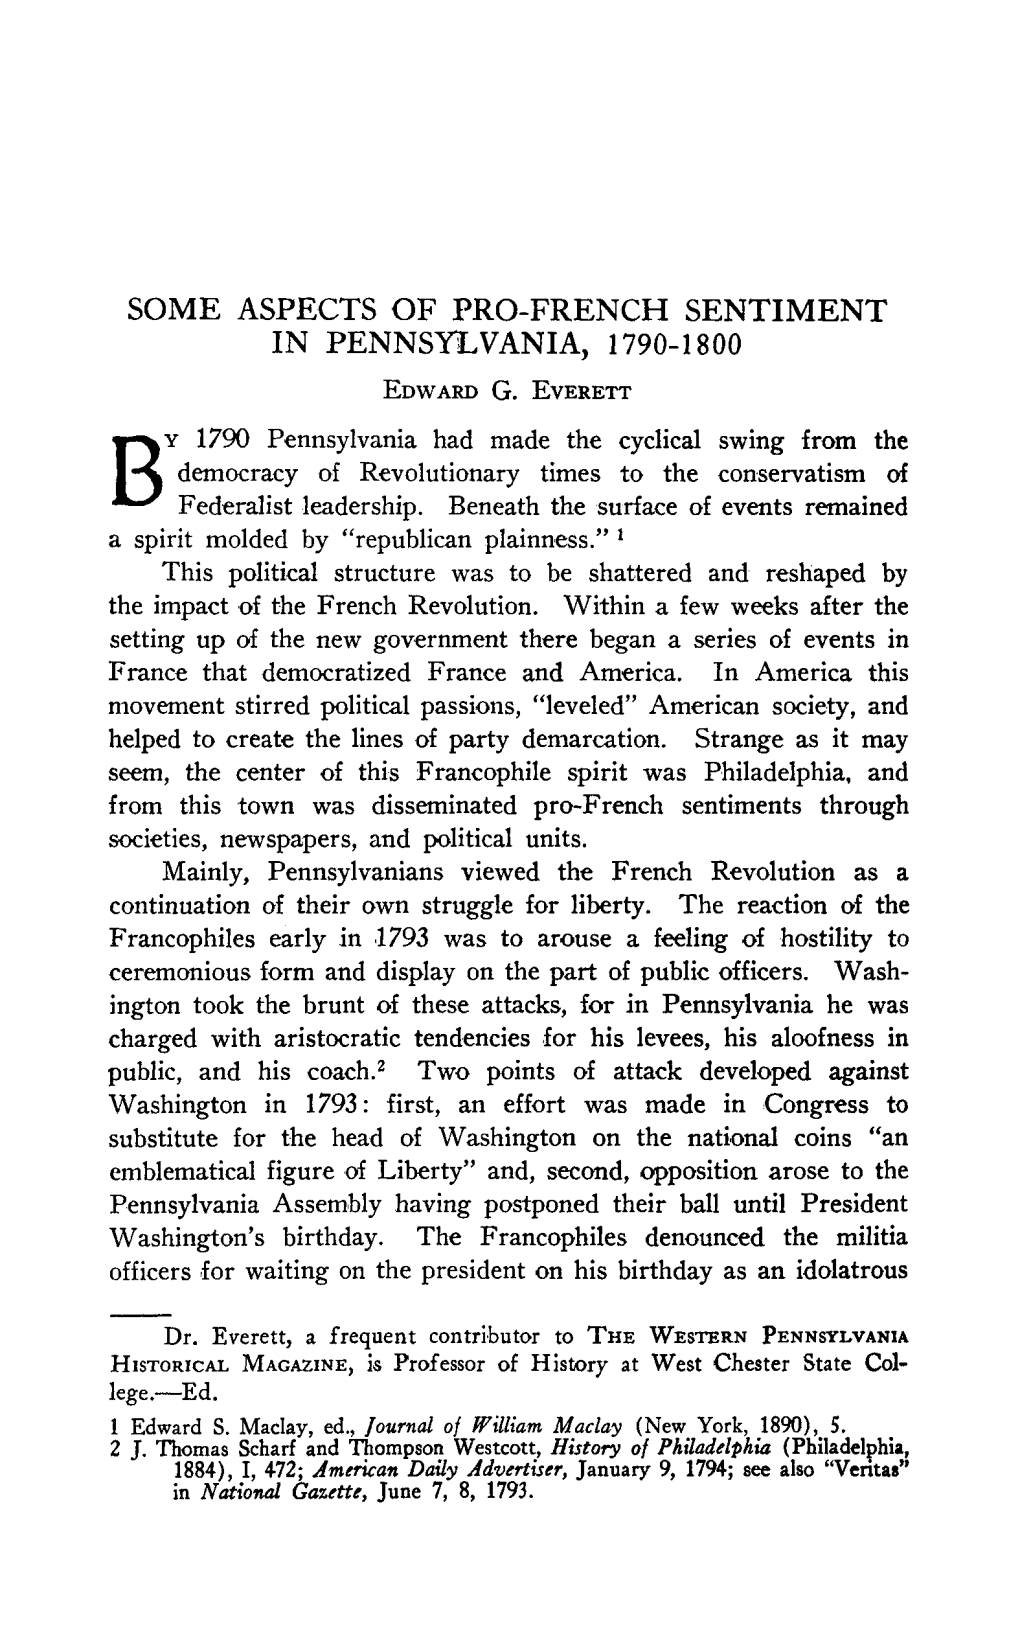 By 1790 Pennsylvania Had Made the Cyclical Swing From